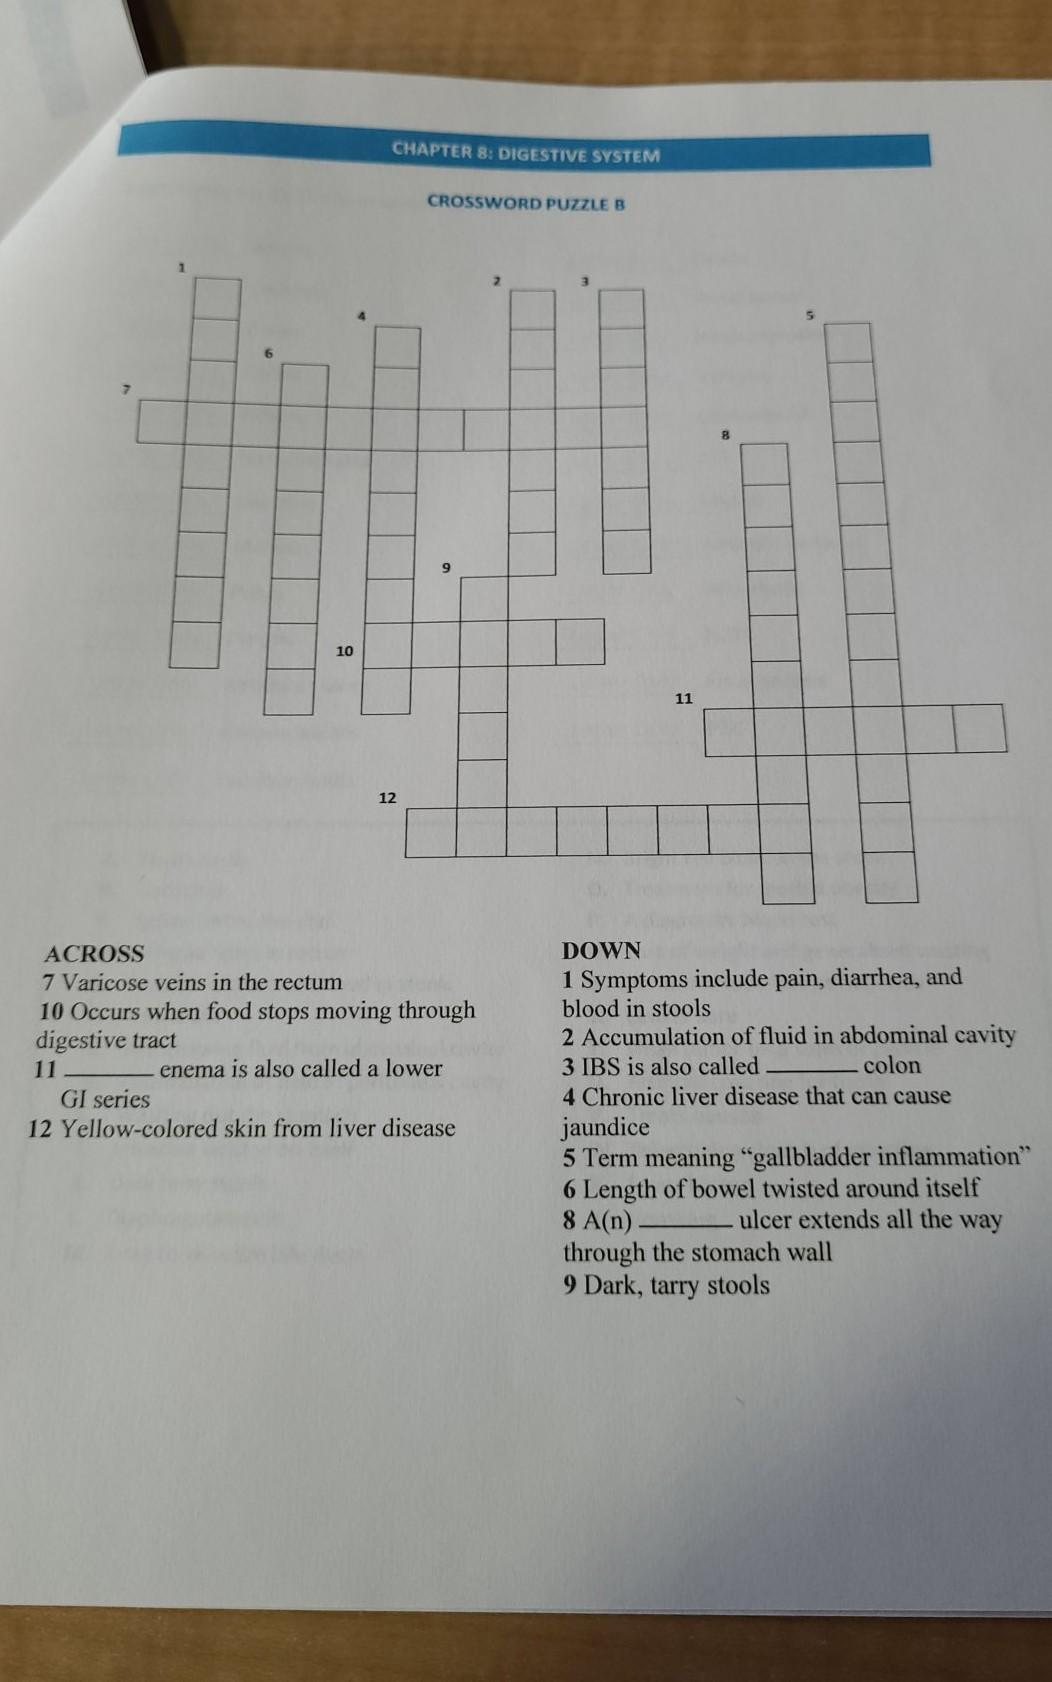 CHAPTER 8: DIGESTIVE SYSTEM
CROSSWORD PUZZLE B
9.
10
11
12
ACROSS
DOWN
7 Varicose veins in the rectum
10 Occurs when food stops moving through
digestive tract
1 Symptoms include pain, diarrhea, and
blood in stools
2 Accumulation of fluid in abdominal cavity
3 IBS is also called
4 Chronic liver disease that can cause
11
enema is also called a lower
colon
GI series
jaundice
5 Term meaning "gallbladder inflammation"
6 Length of bowel twisted around itself
8 A(n)
through the stomach wall
9 Dark, tarry stools
12 Yellow-colored skin from liver disease
ulcer extends all the way
